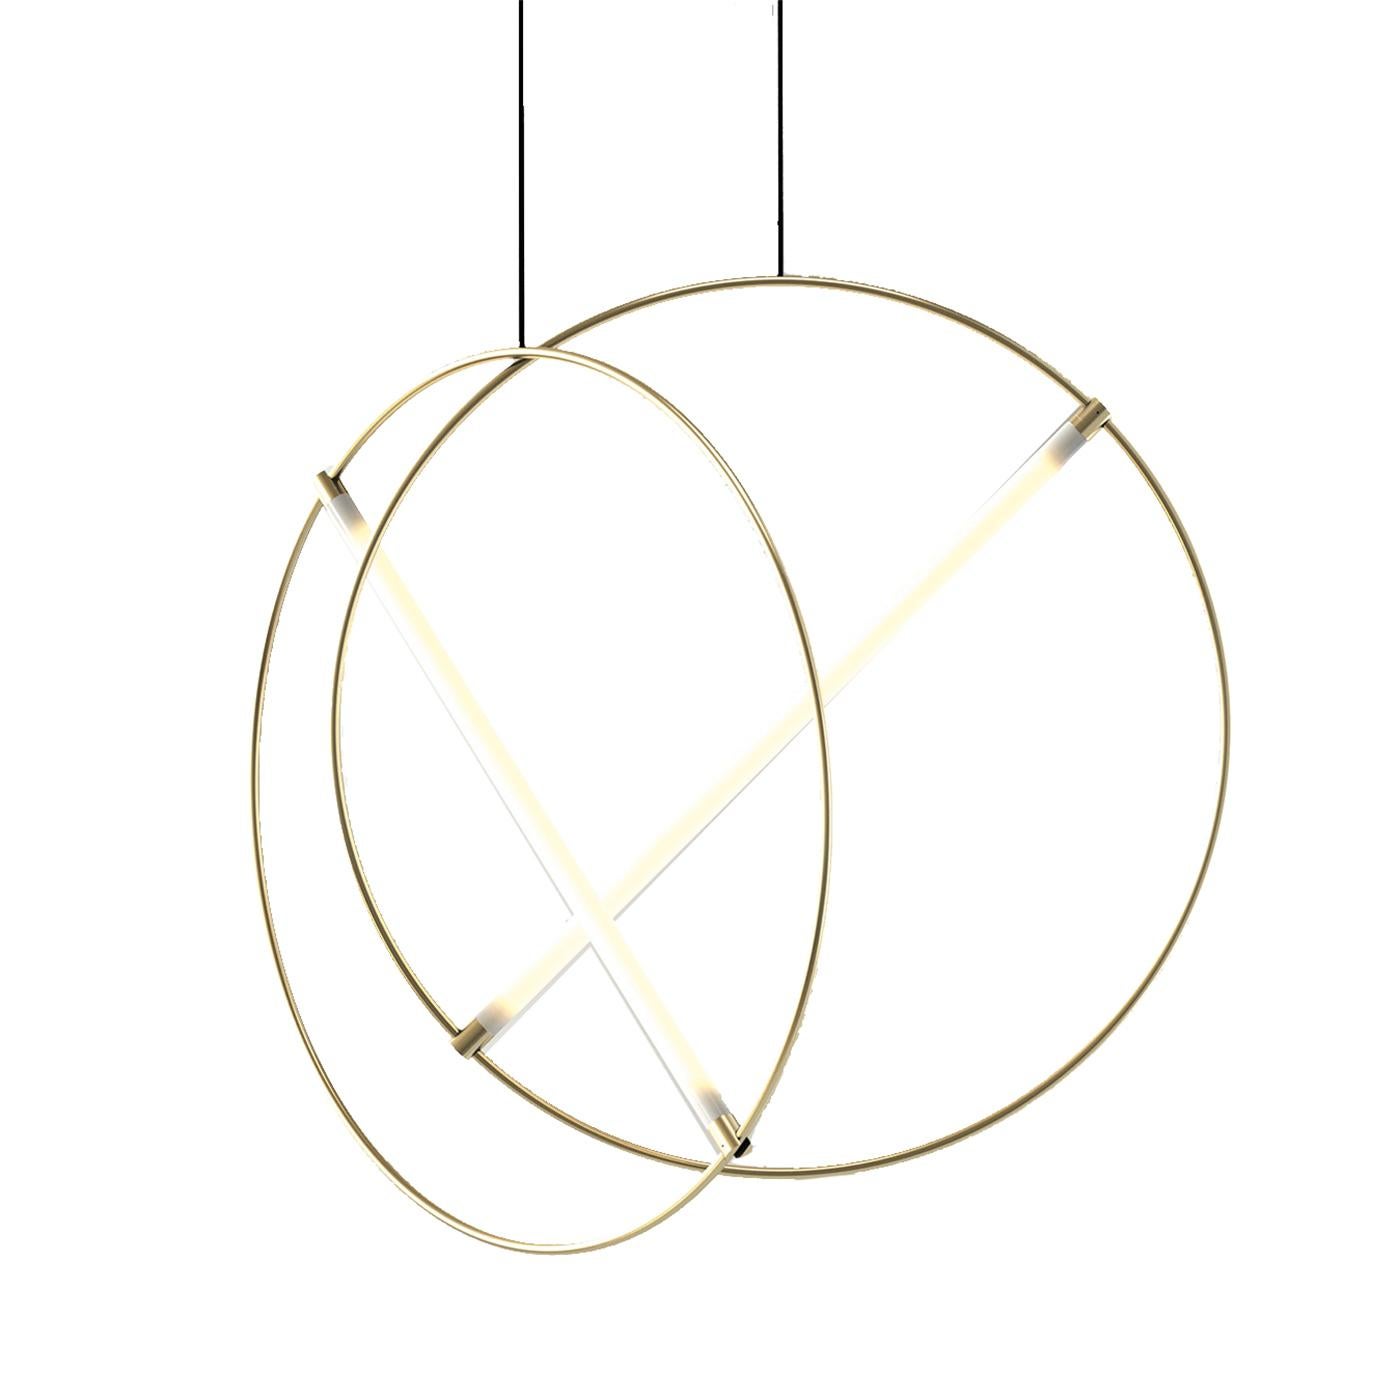 This exquisite ceiling lamp uses pure geometric shapes to create a striking light fixture that will have an arresting effect in any room it is placed. Its structure is made of one brass circular tube, inside of which one straight fluorescent light